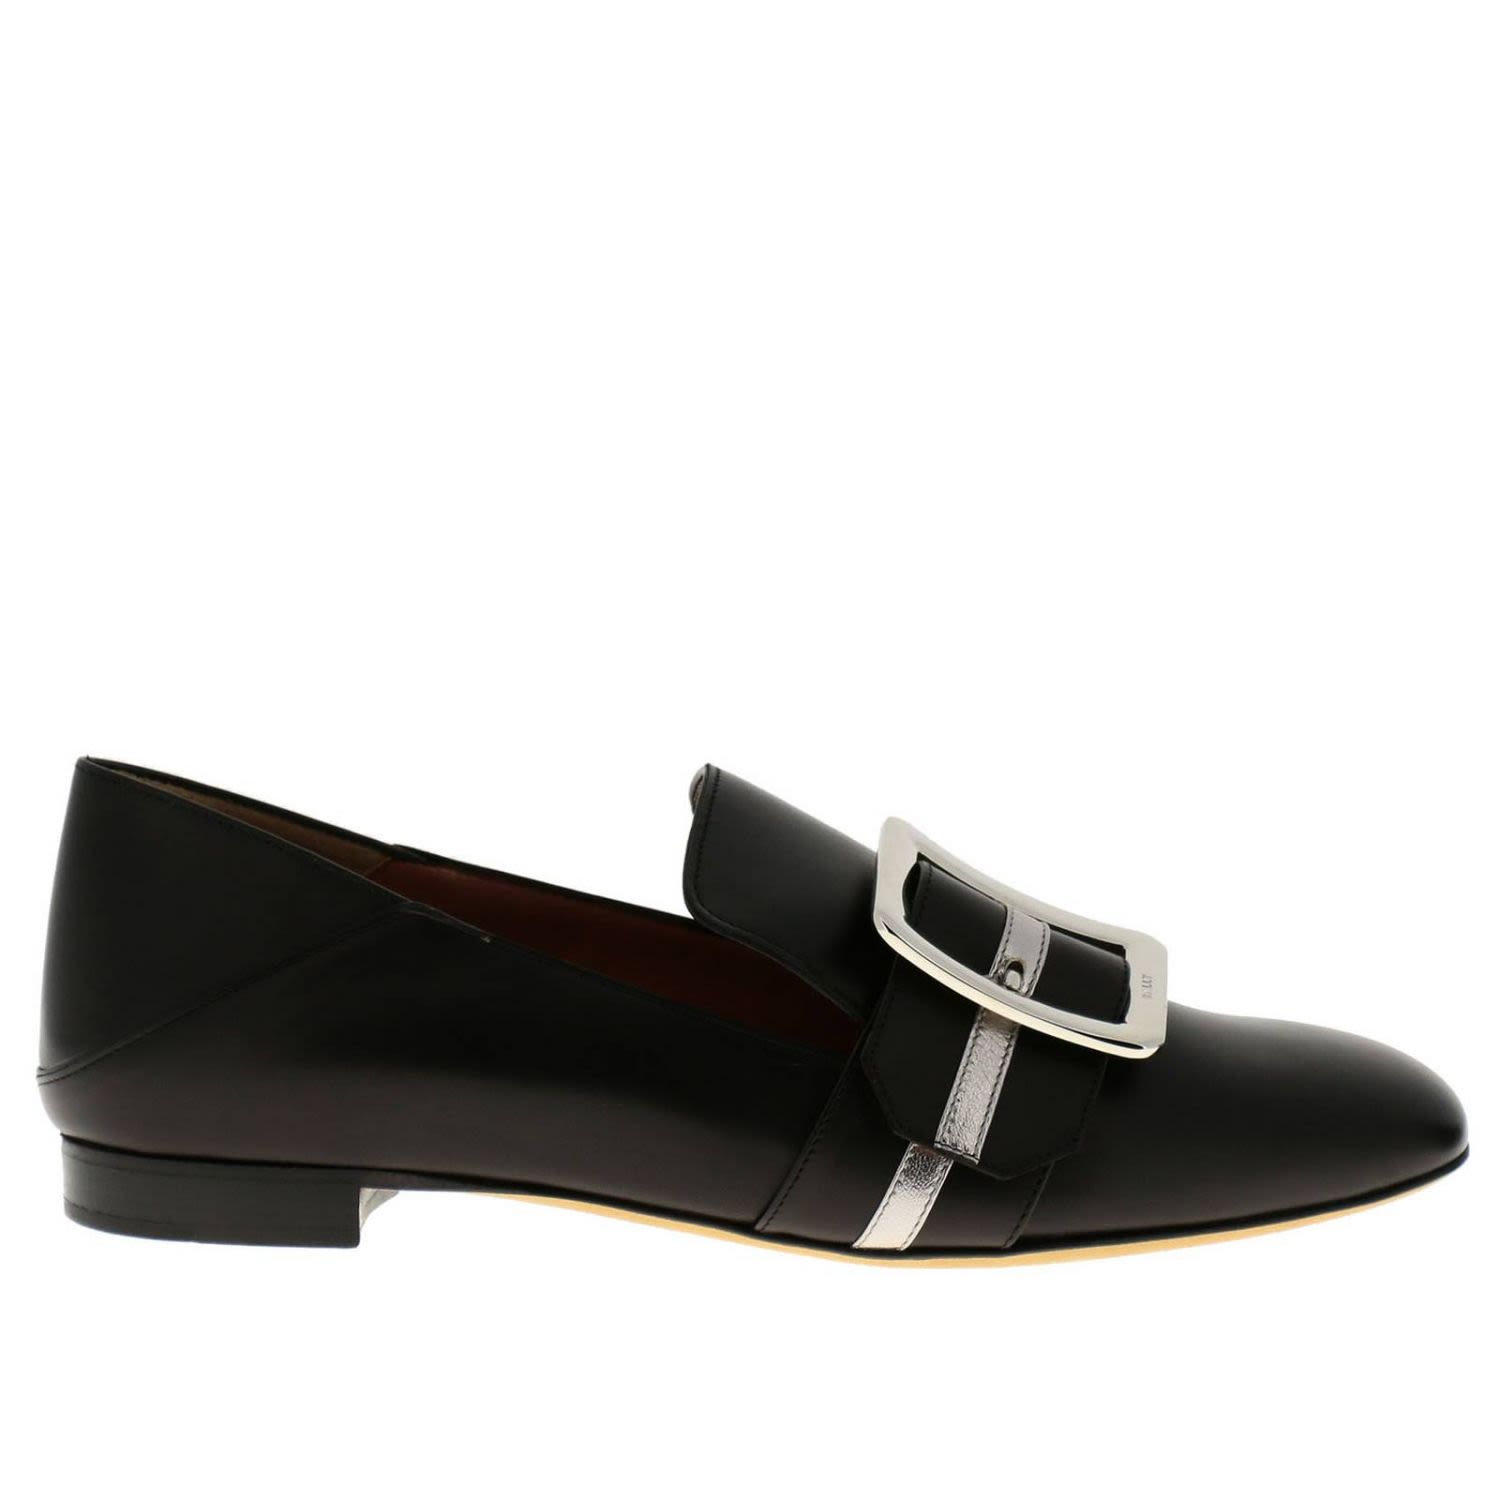 Bally Bally Loafers Shoes Women Bally - black - 10762905 | italist